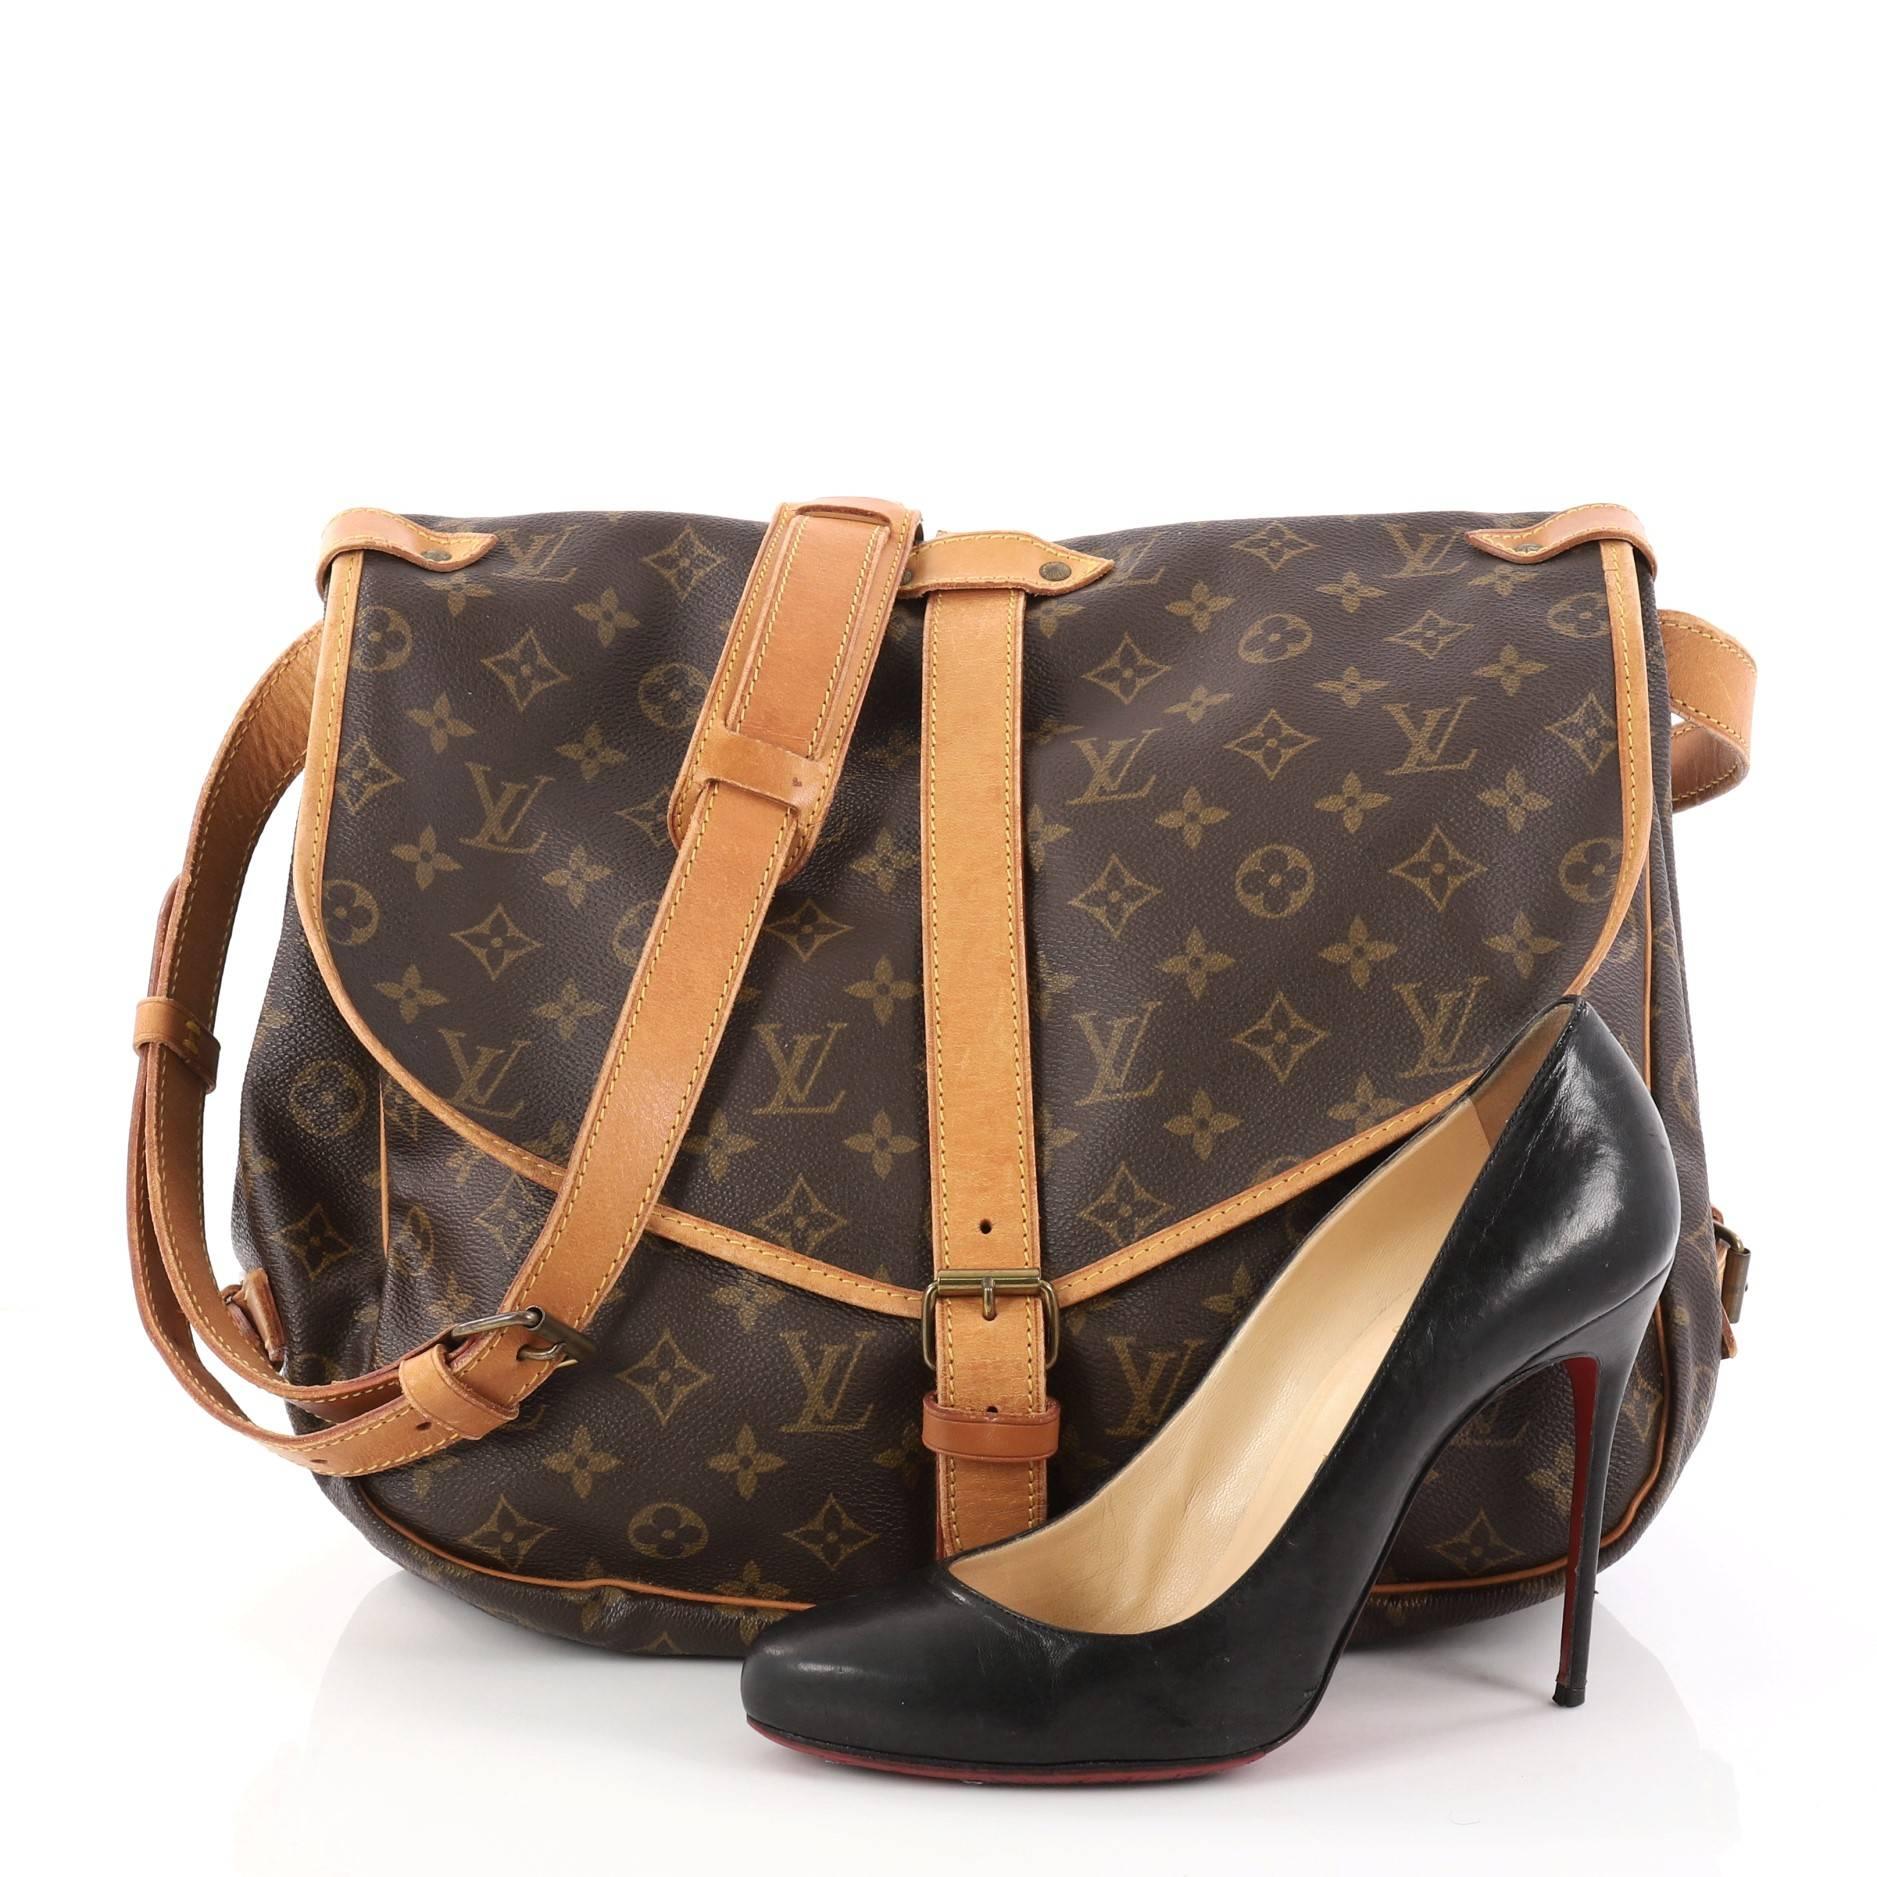 This authentic Louis Vuitton Saumur Handbag Monogram Canvas GM showcases the brand's reinterpretation of the classic saddle bag. Crafted in Louis Vuitton's popular brown monogram coated canvas, this bag features long adjustable shoulder strap,